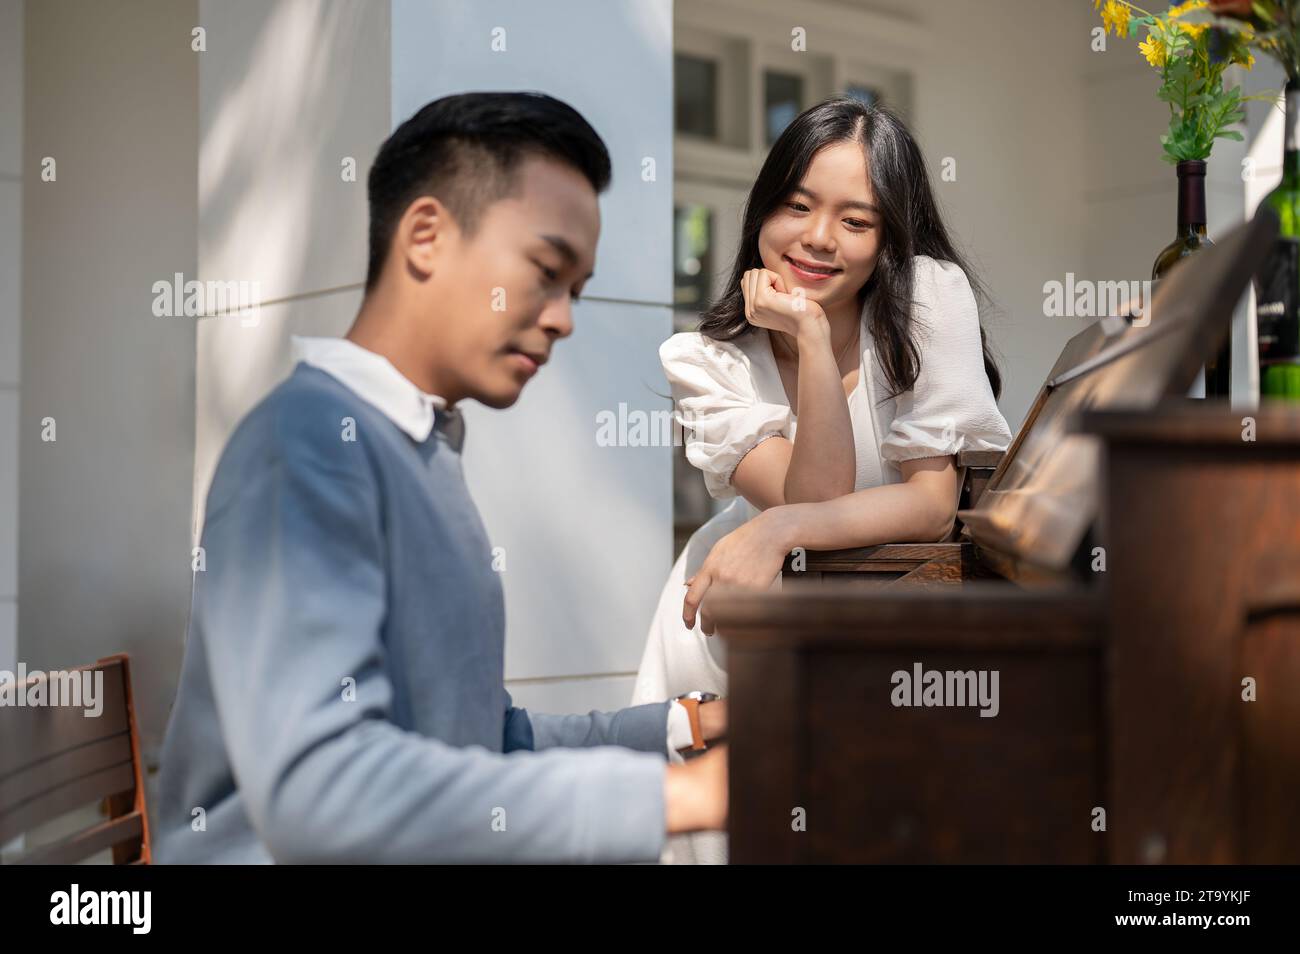 A beautiful young Asian girl is admiring at her boyfriend while he is playing piano in a garden. couple concept Stock Photo